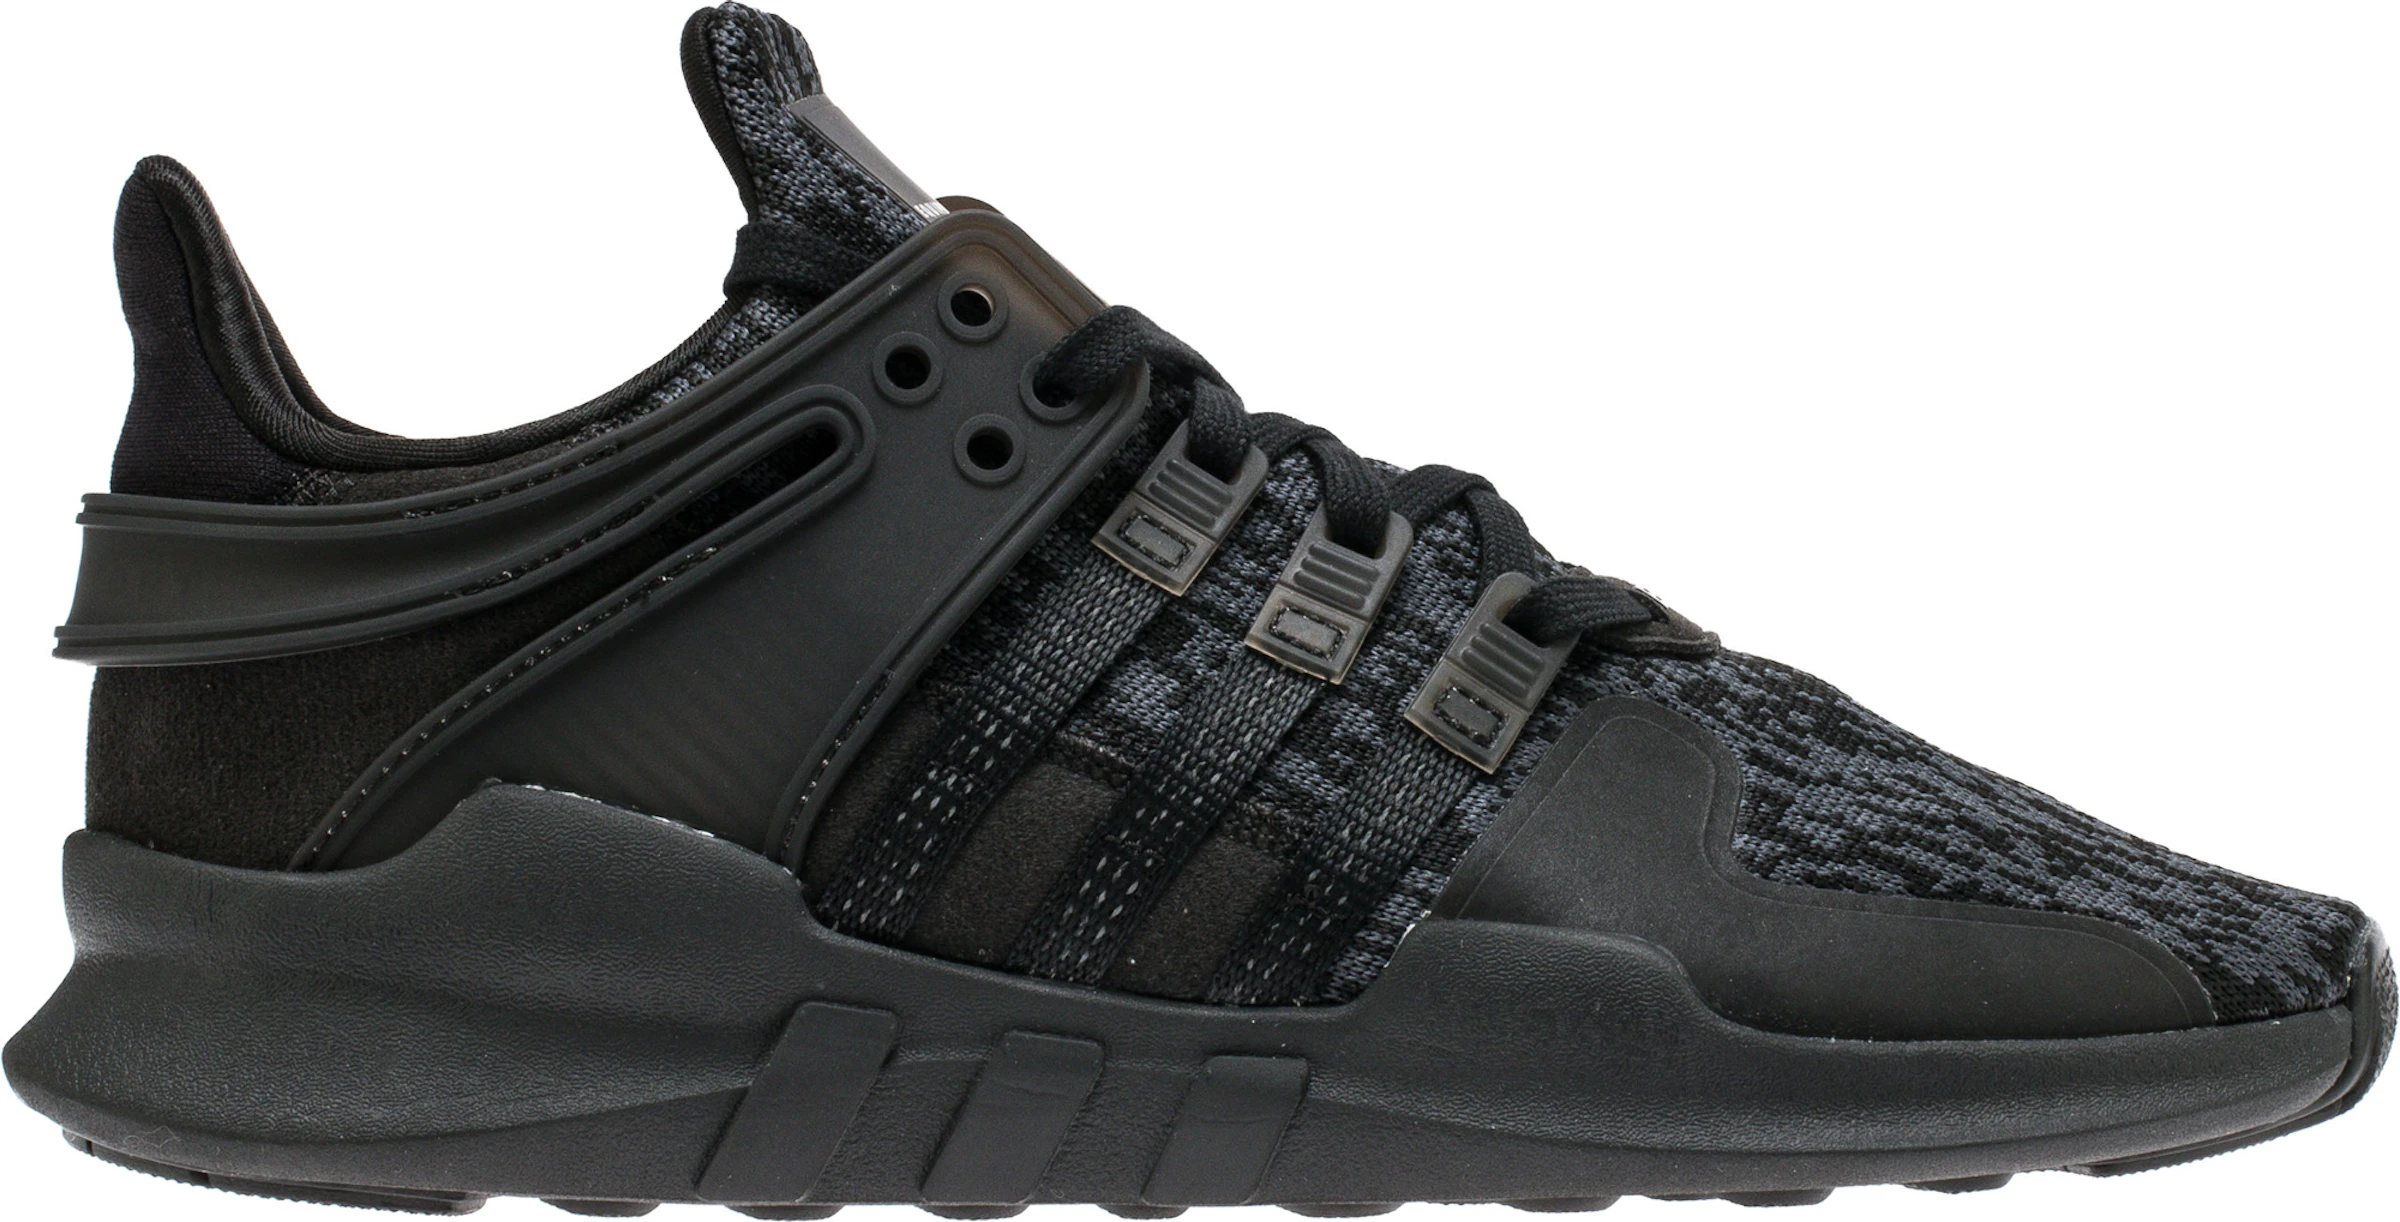 adidas EQT Support Adv Black (Youth) - BY9873 US